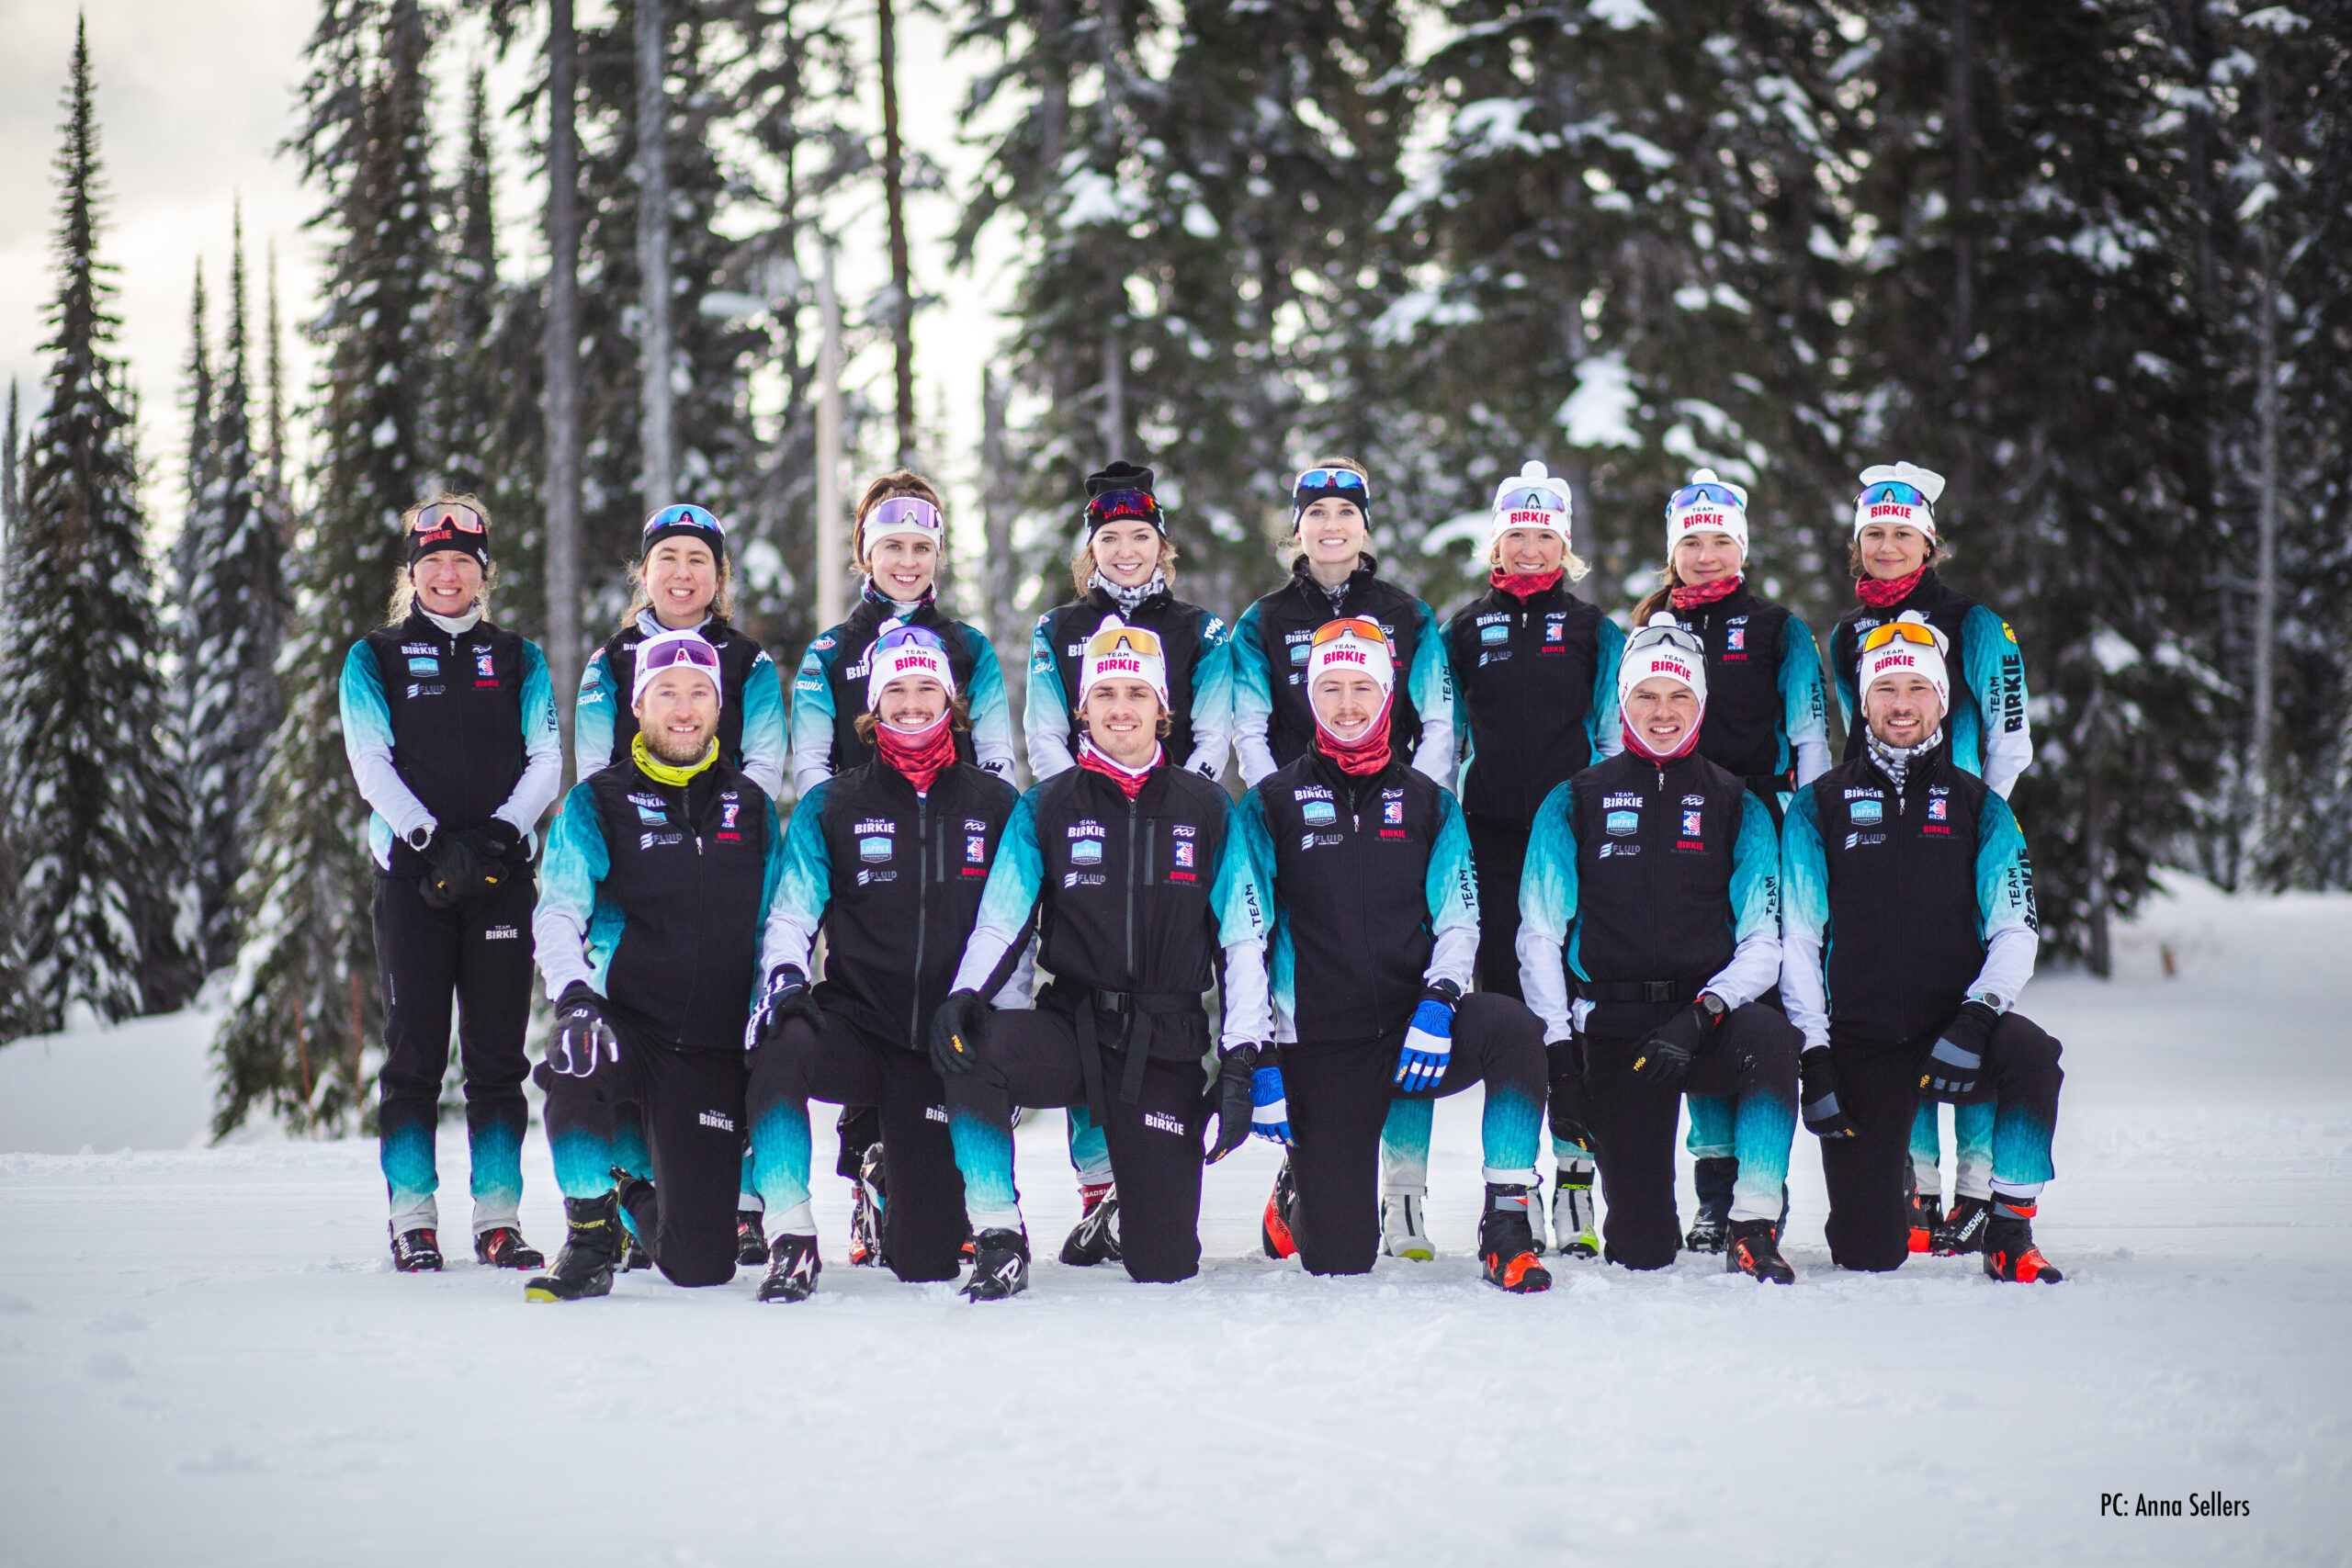 UnTapped Maple and Team Birkie Announce Partnership for 2023 Program